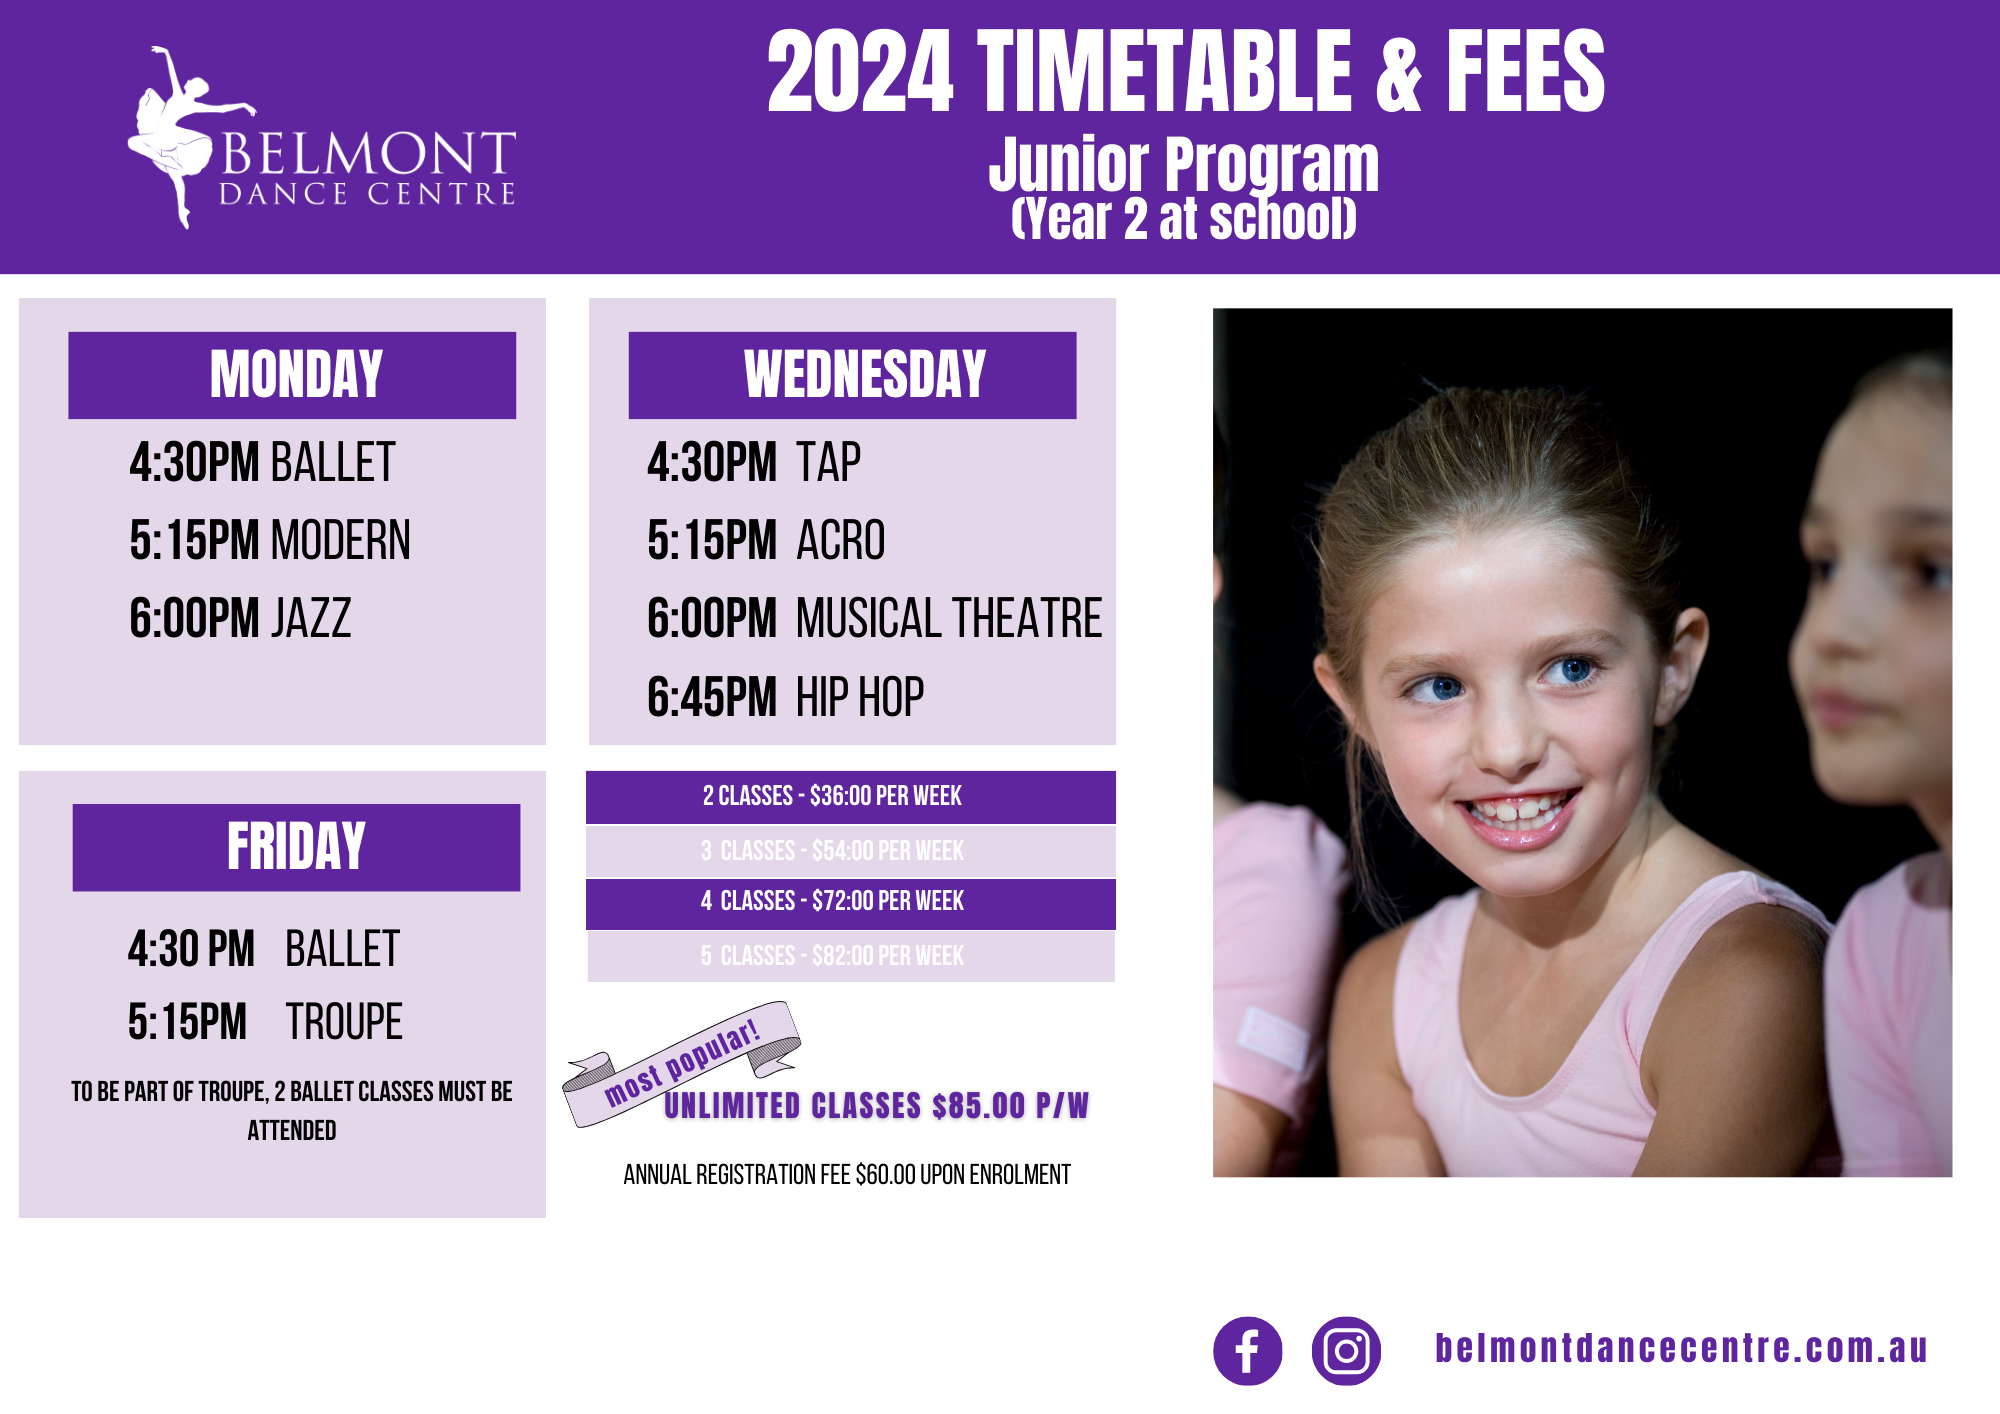 Little girl beaming with joy during her dance class at Belmont Dance Centre in Belmont, NSW. Discover the excitement and confidence that dance brings to young learners in our supportive environment!